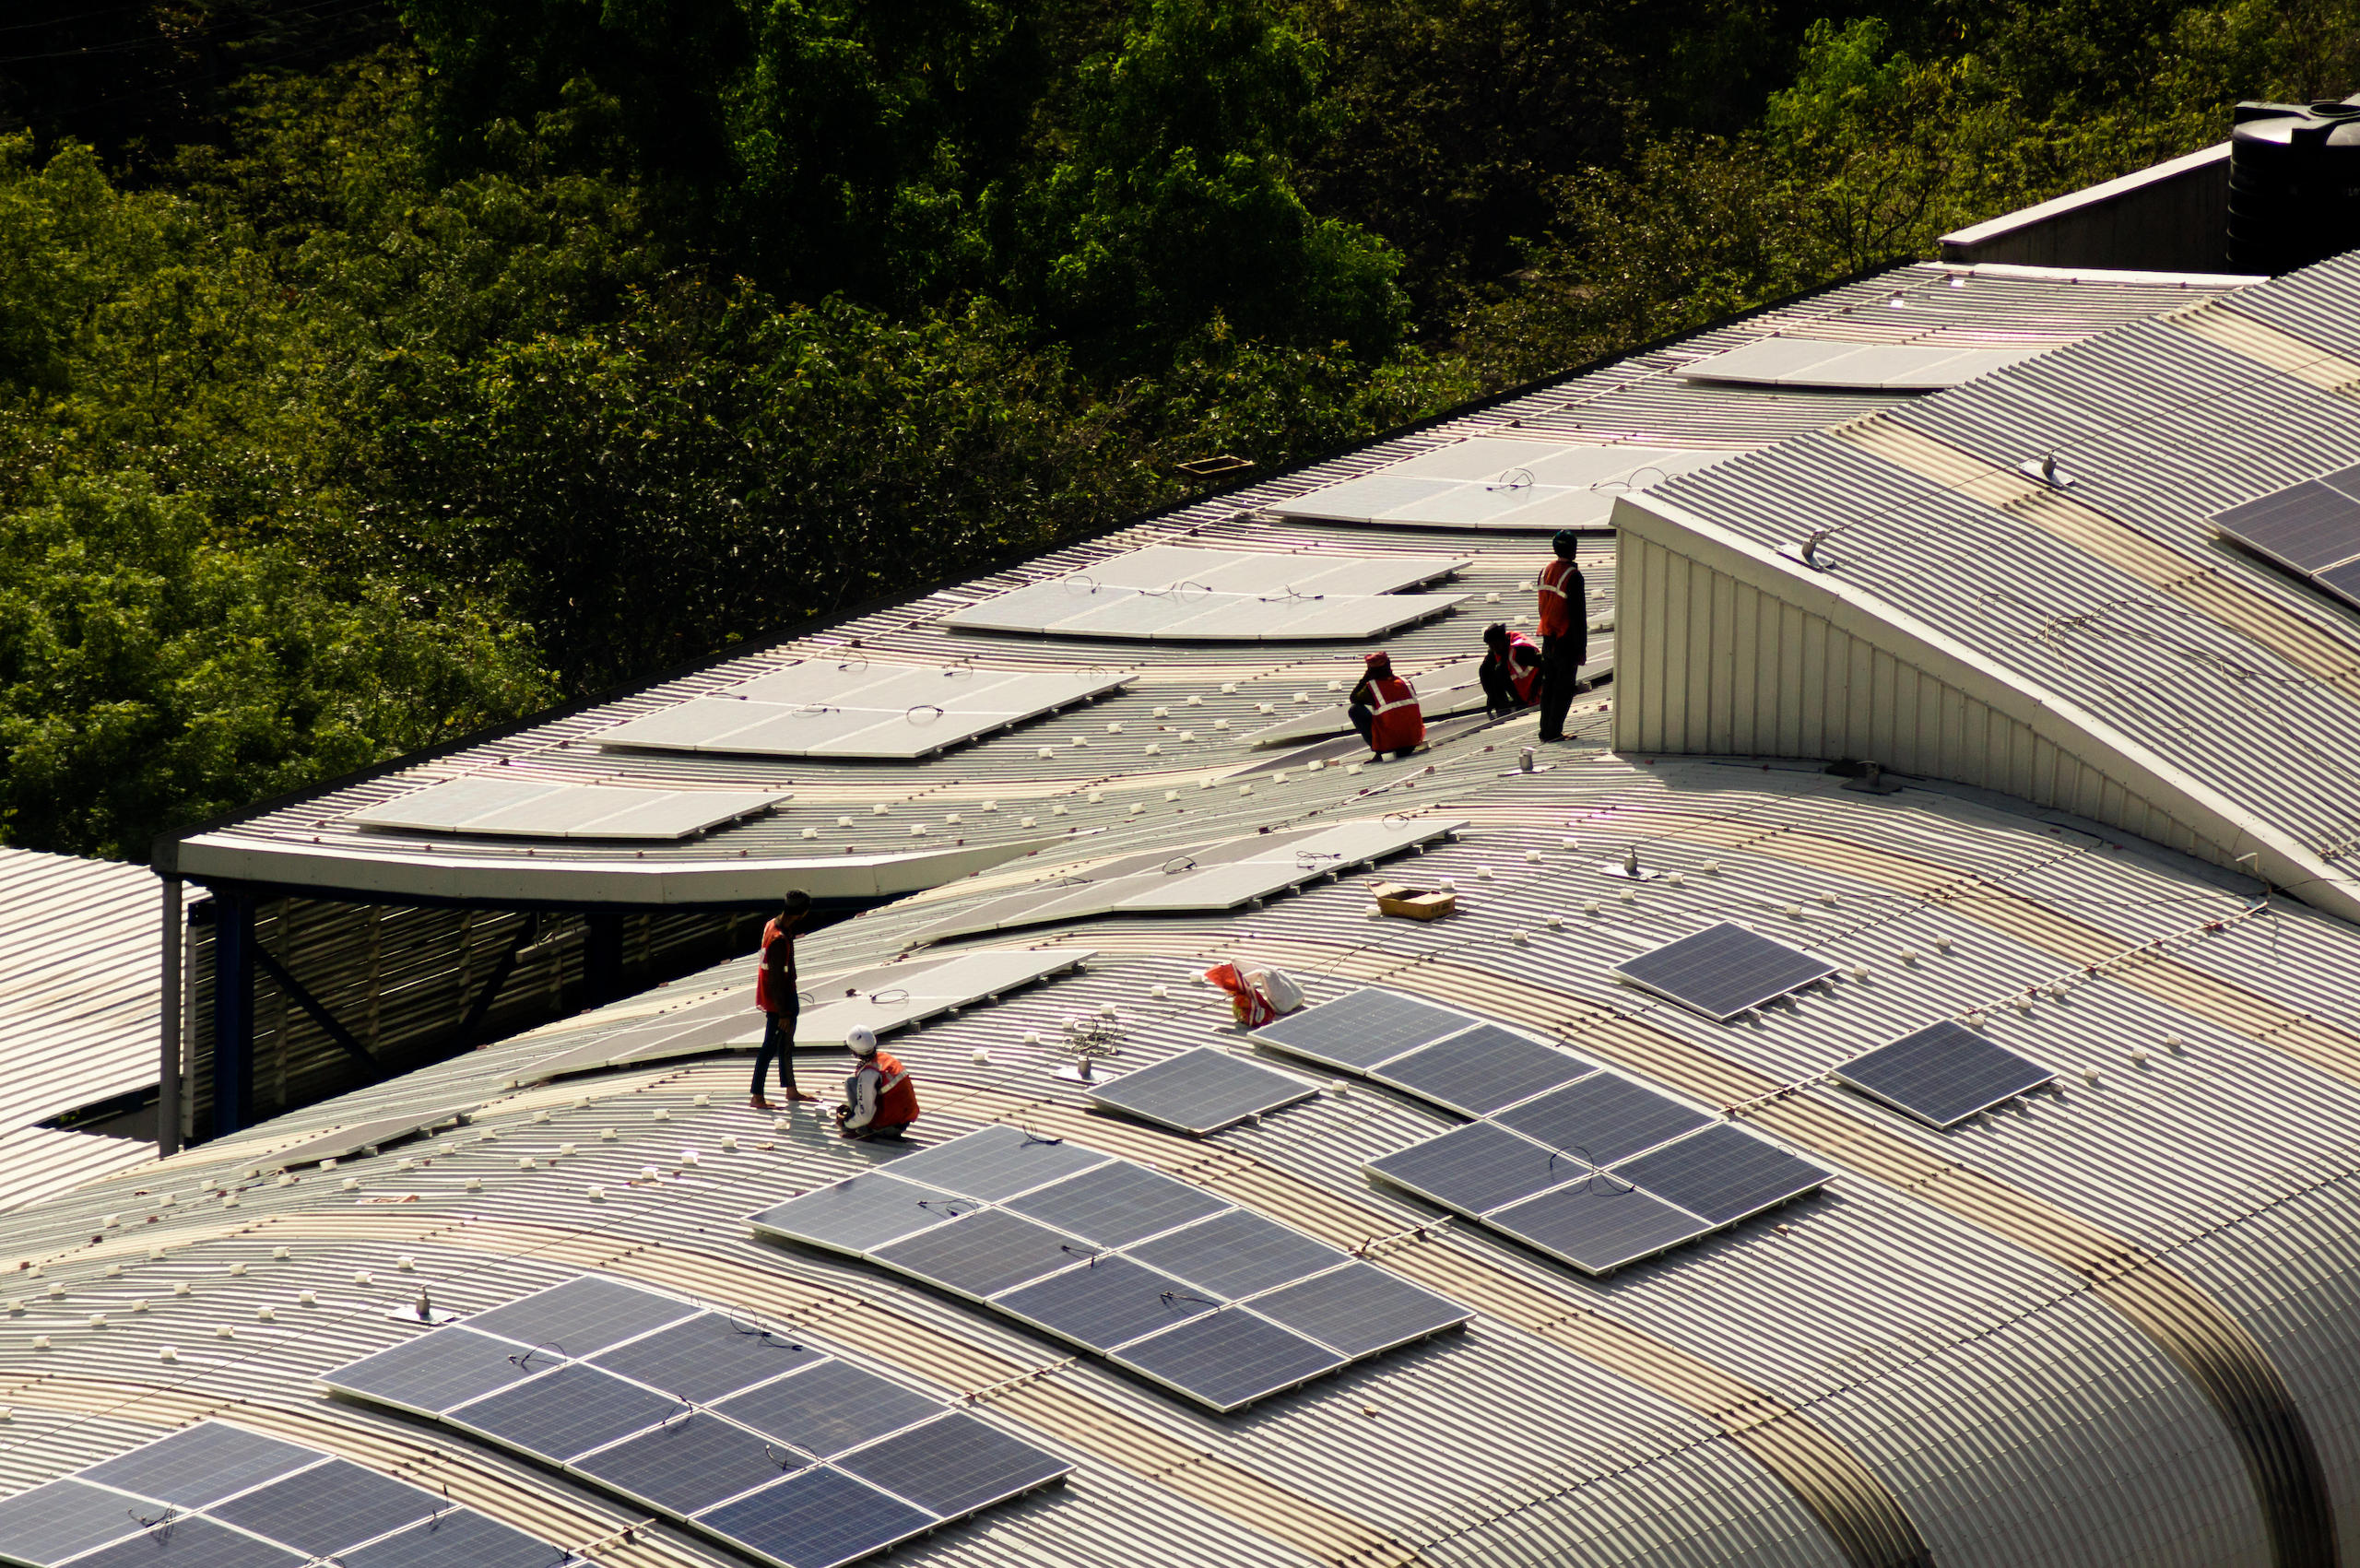 <p>Workers install solar panels on the roof of a metro station in Noida, Delhi, in January 2019 (Amlan Mathur / Alamy)</p>